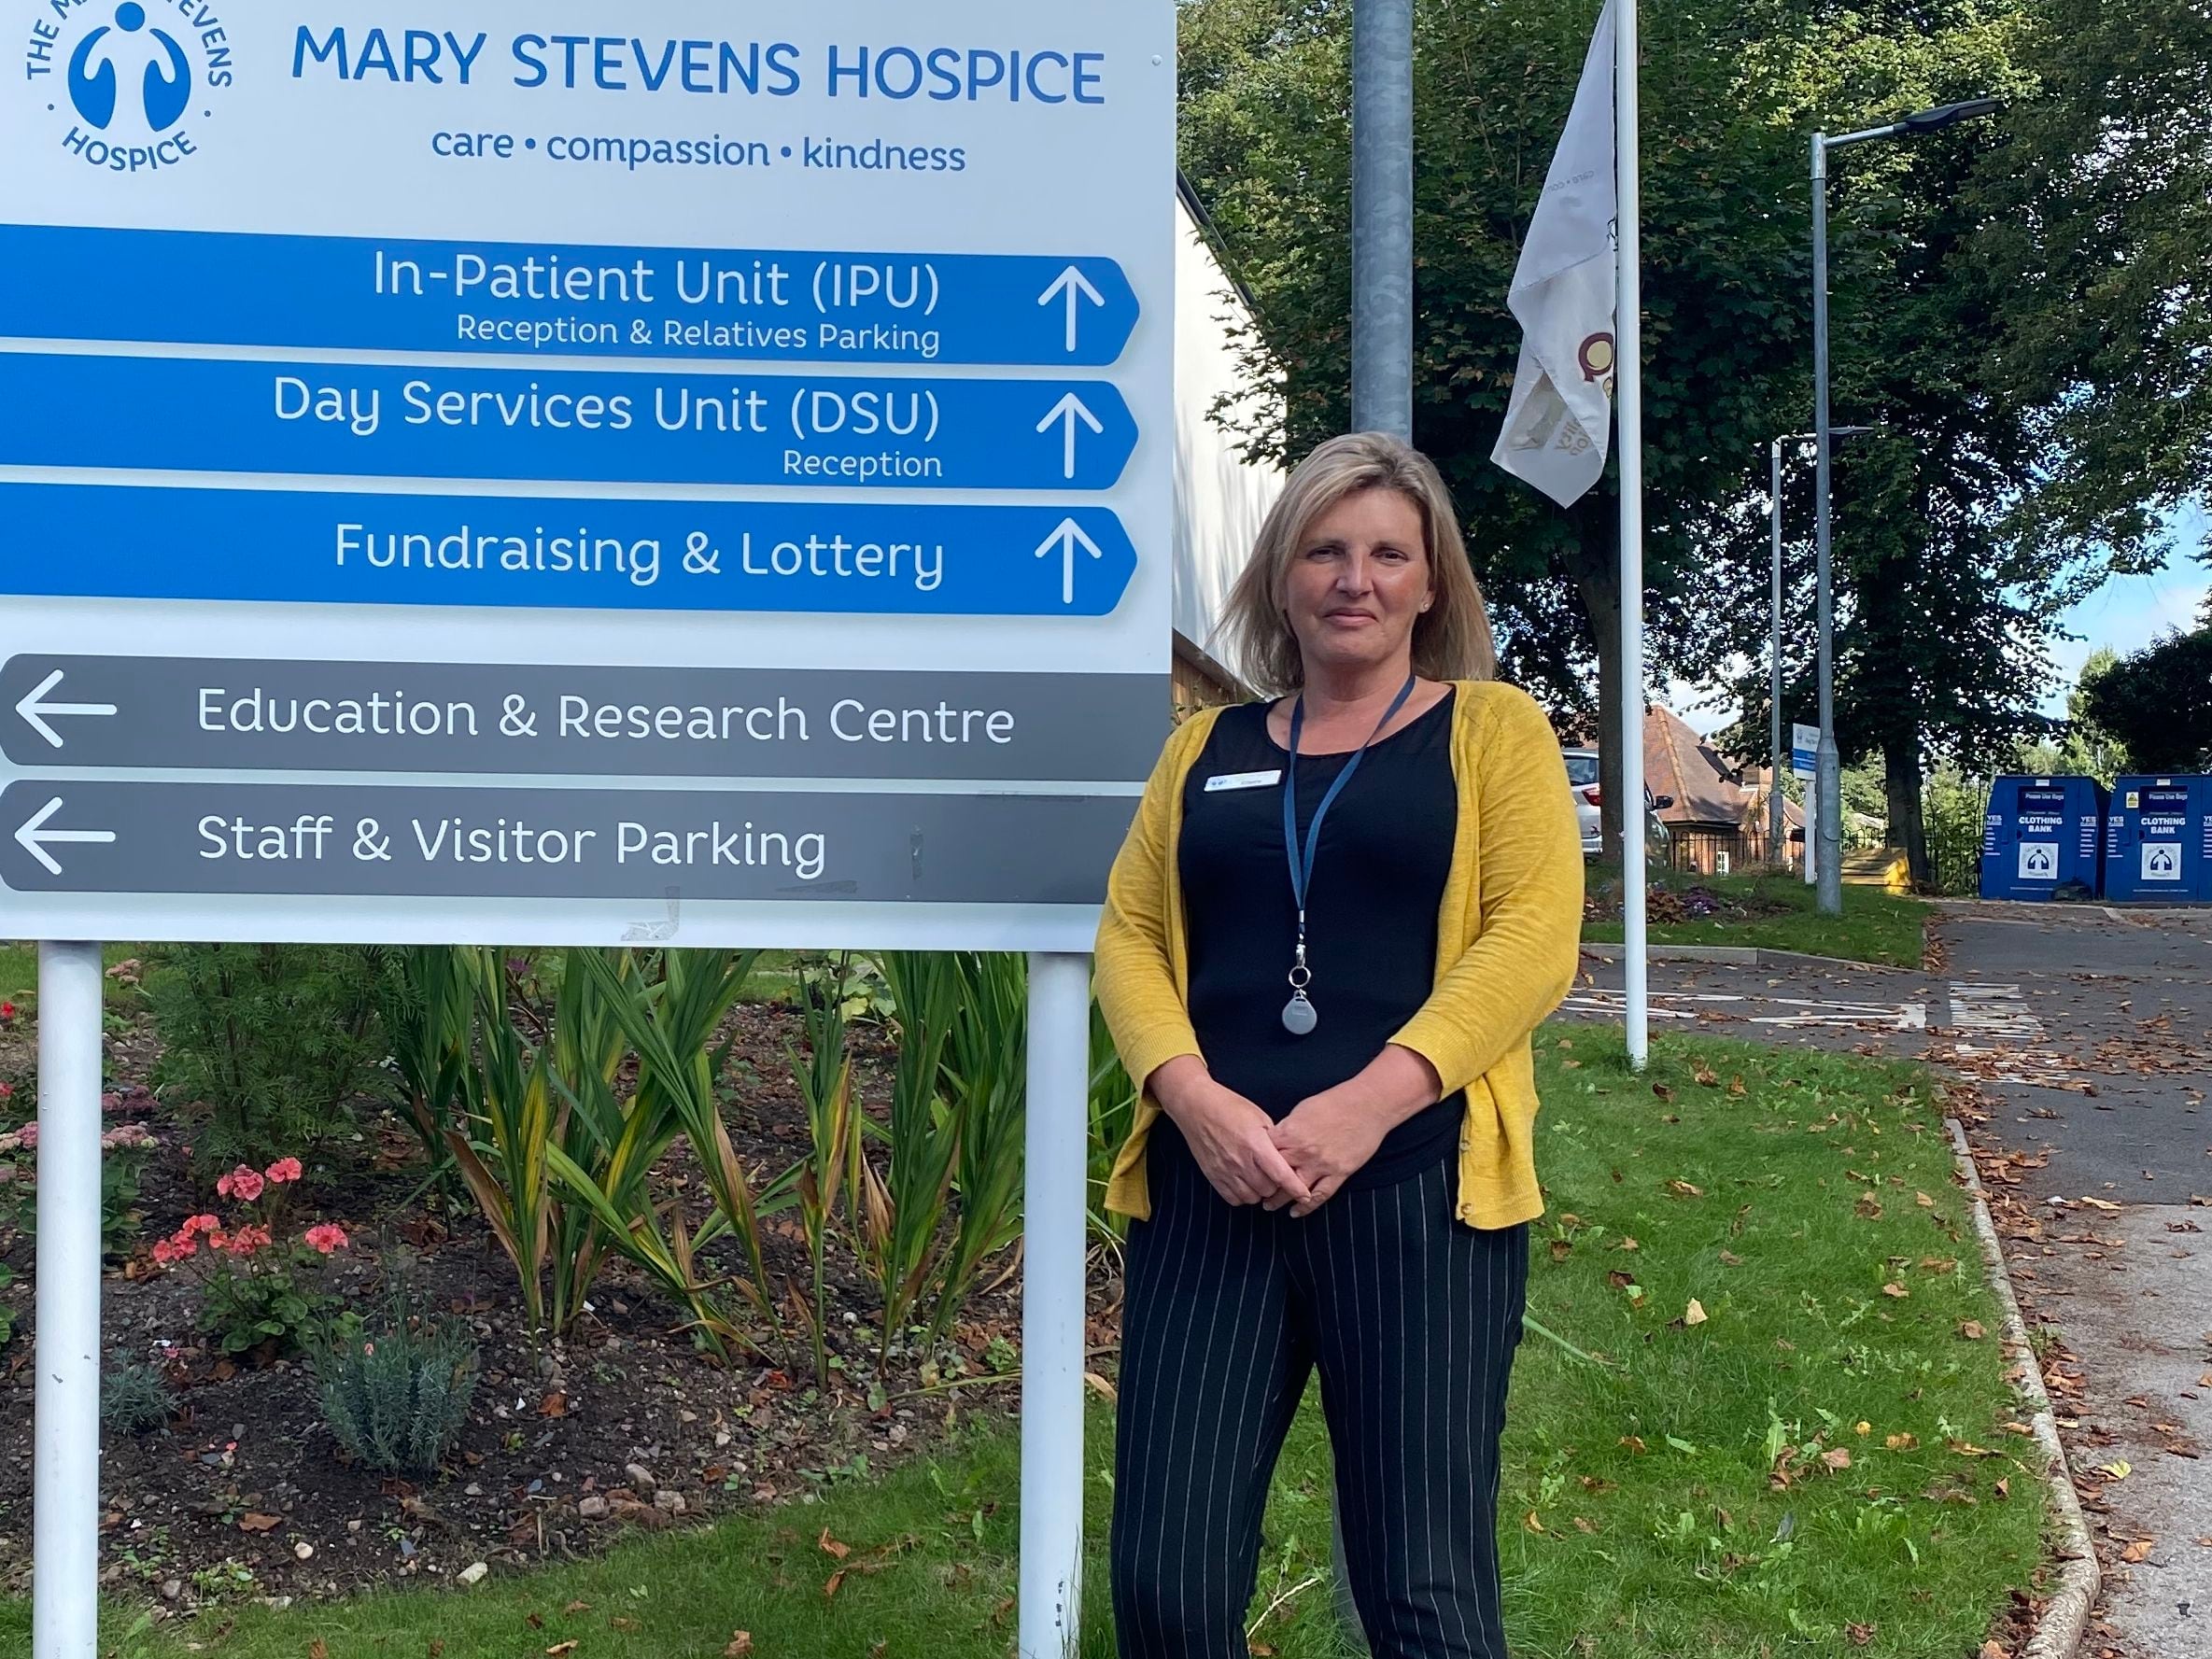 'We are really struggling': Under-pressure hospices need funding review to avoid cash crisis